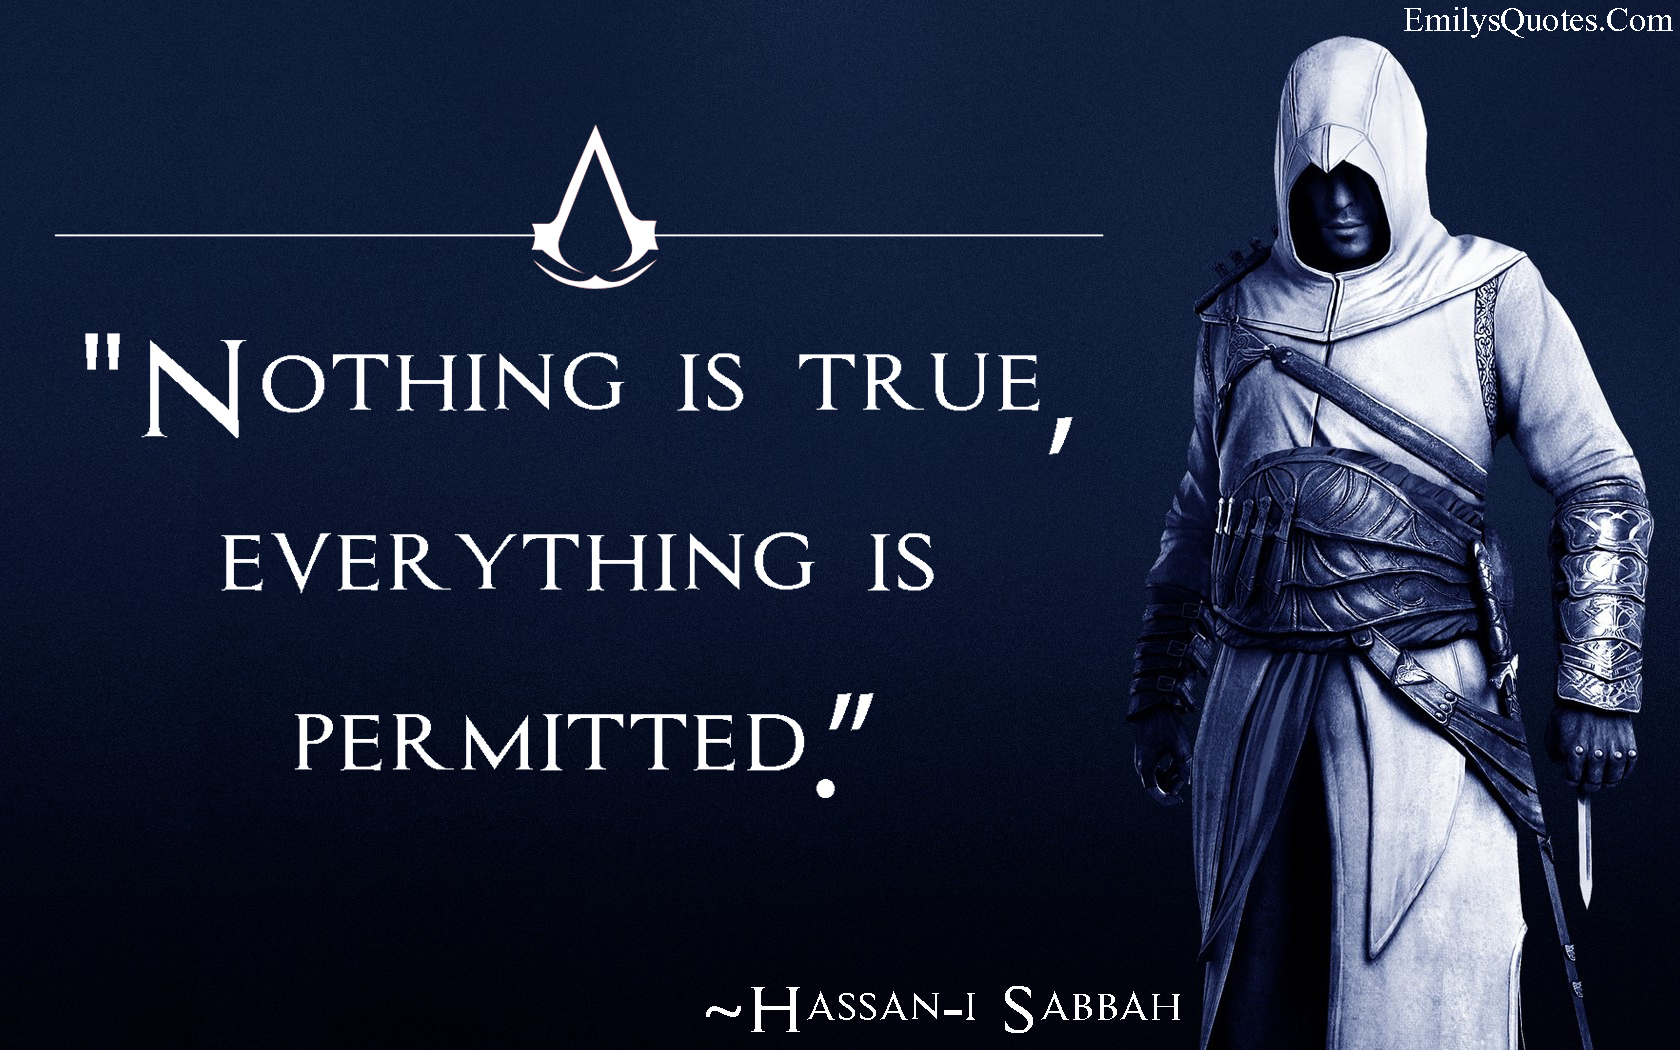 Nothing is true, everything is permitted